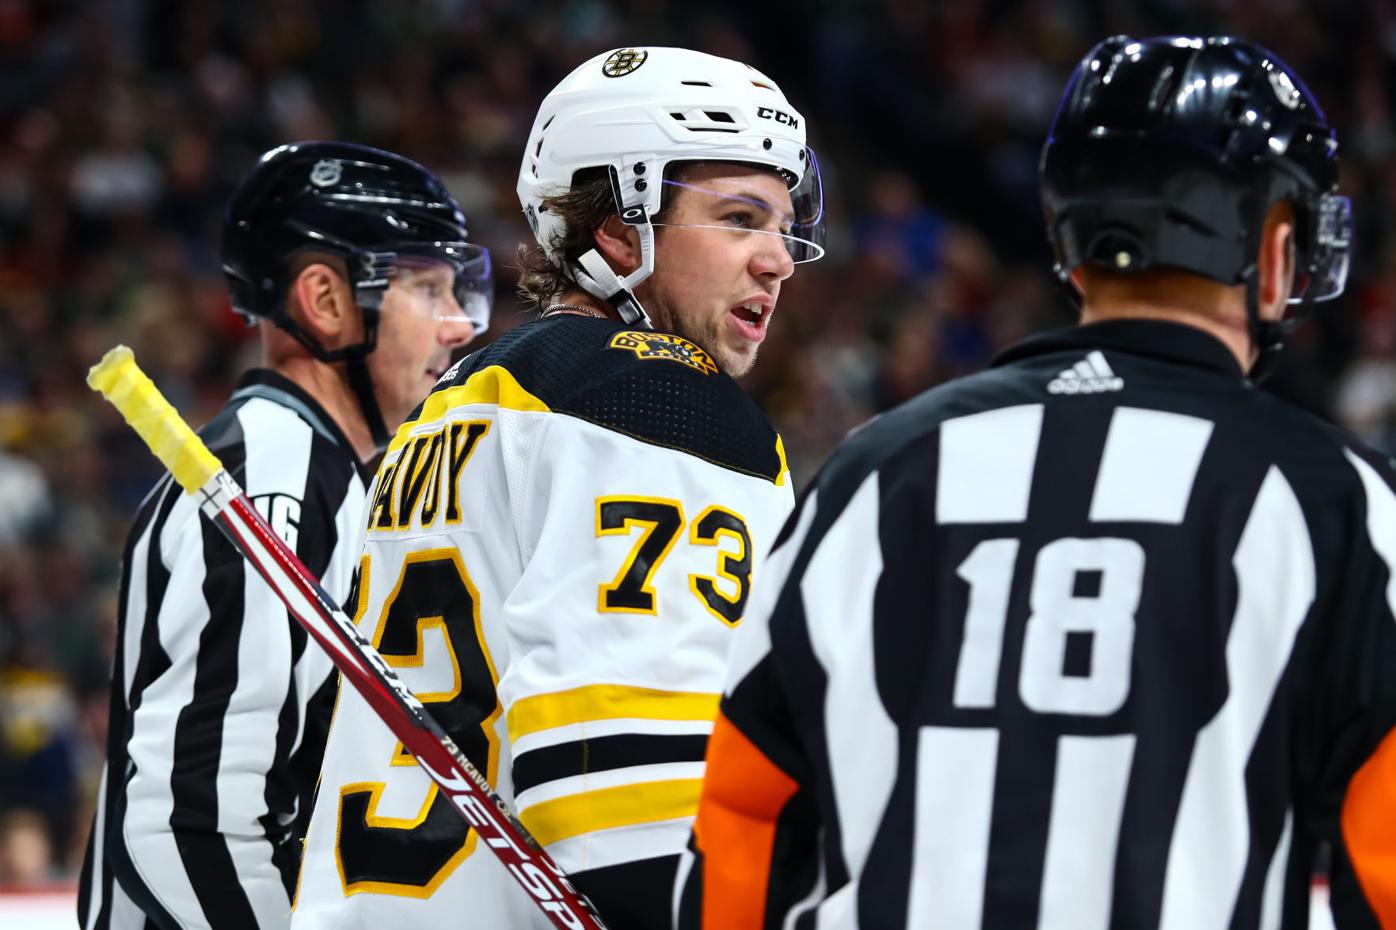 Bruins' Montgomery on Charlie McAvoy: 'He'll be playing within a week